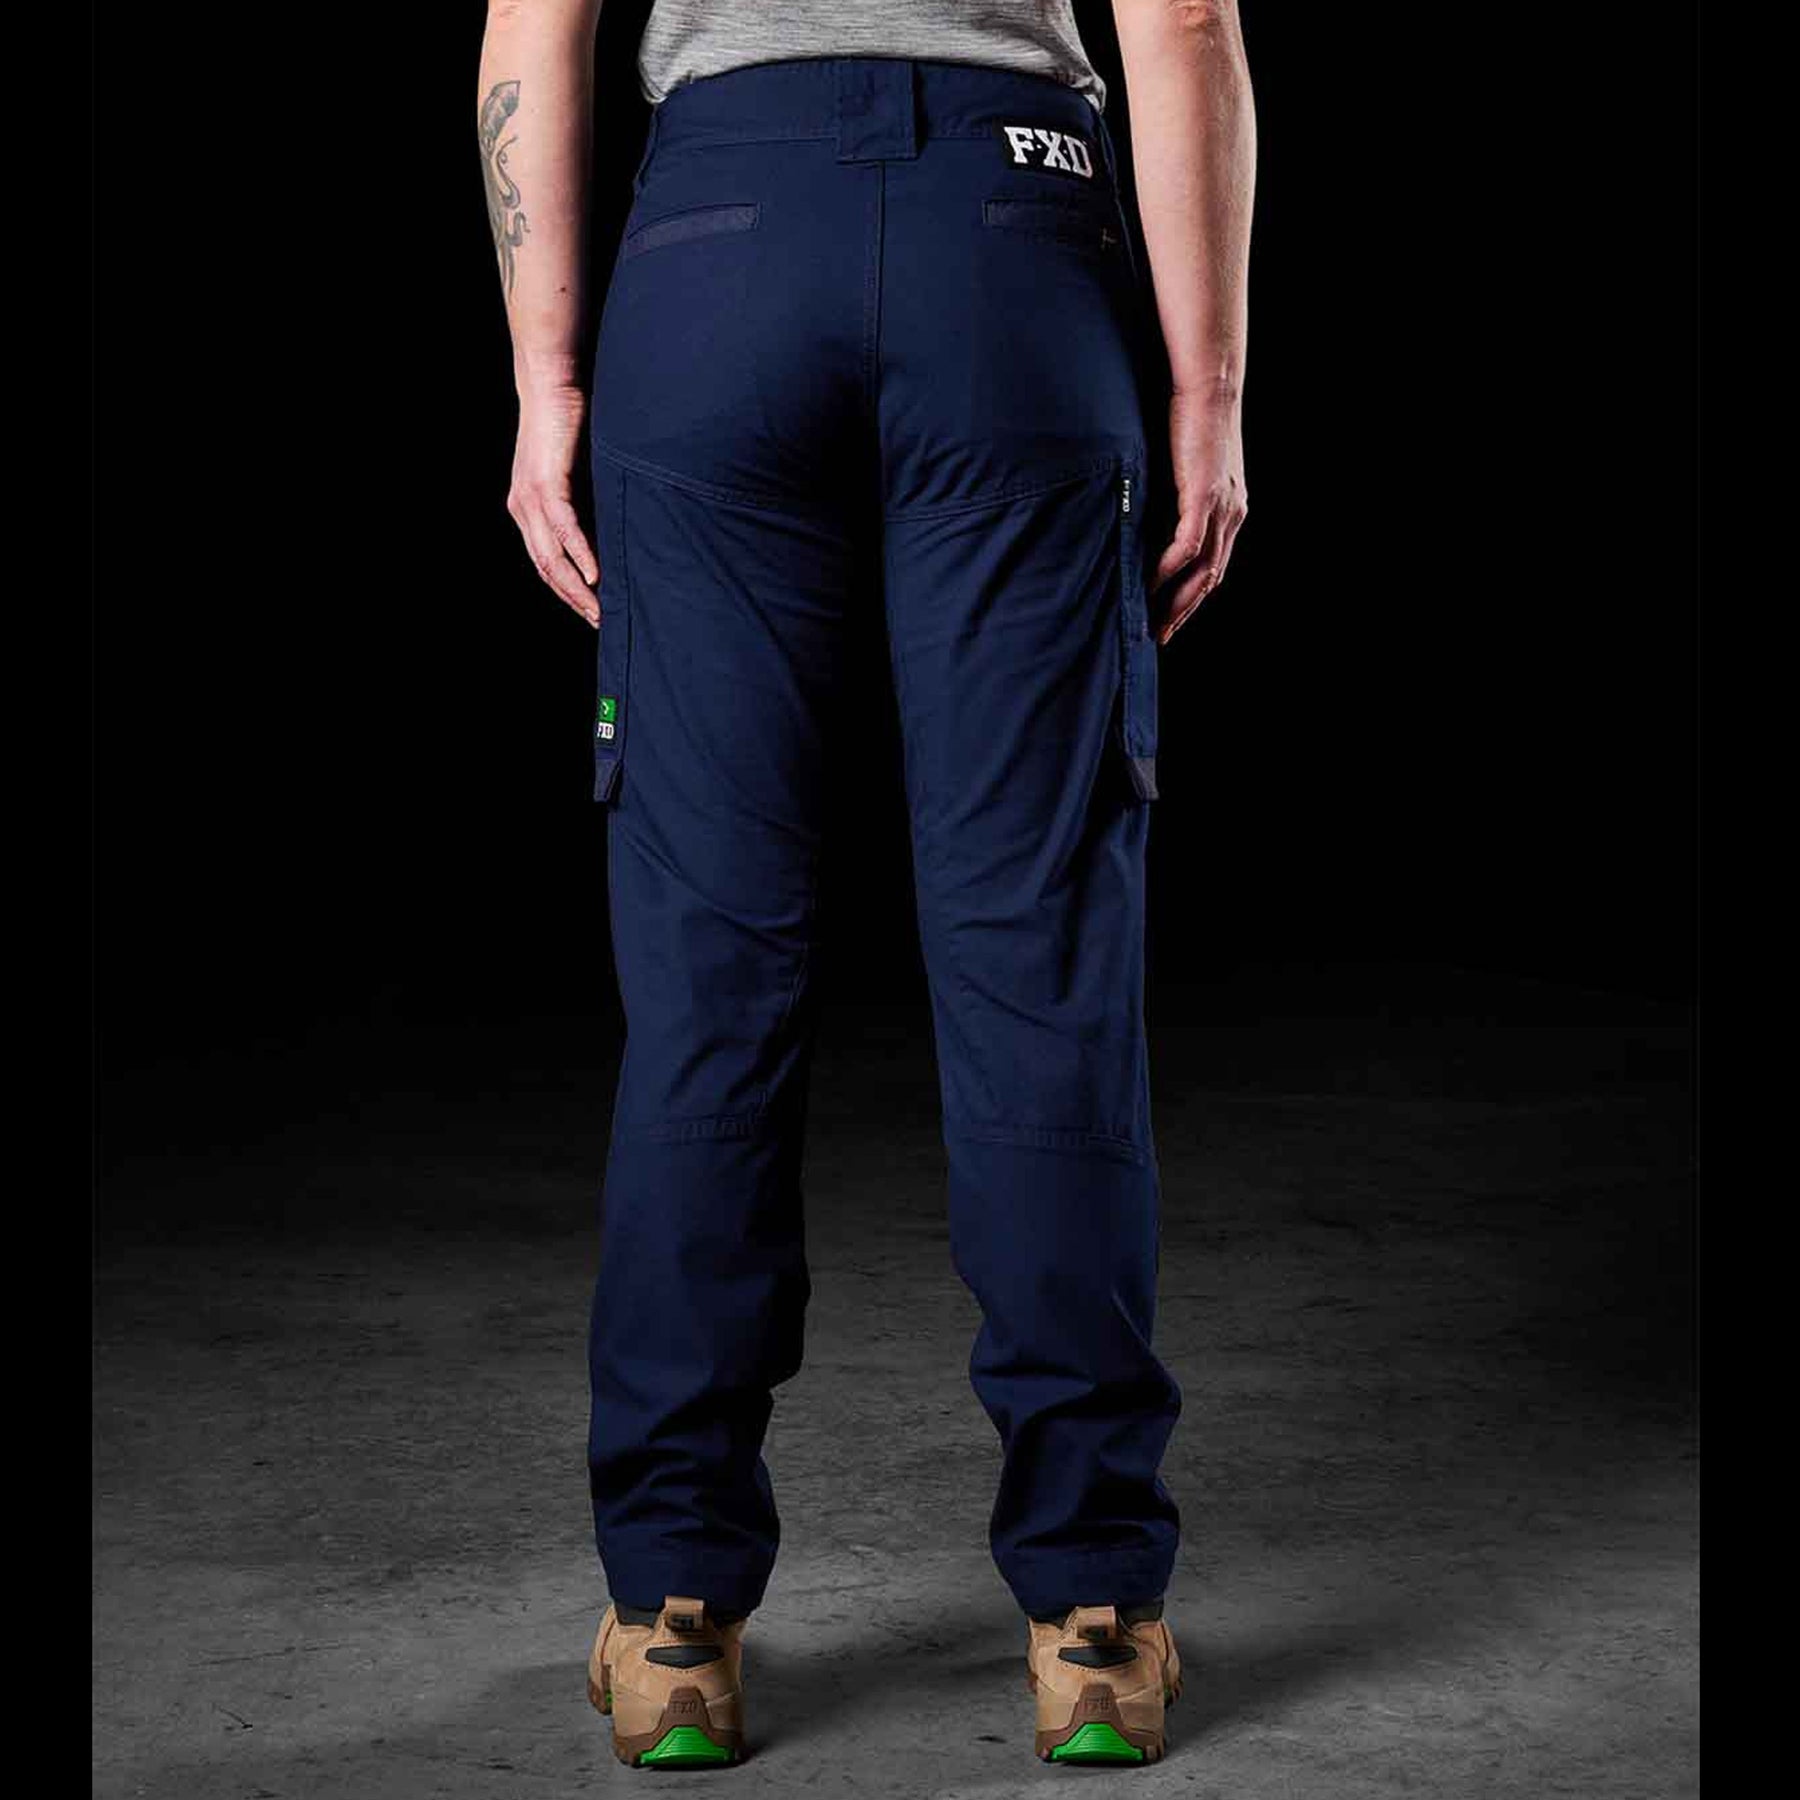 fxd womens stretch ripstop work pants in navy